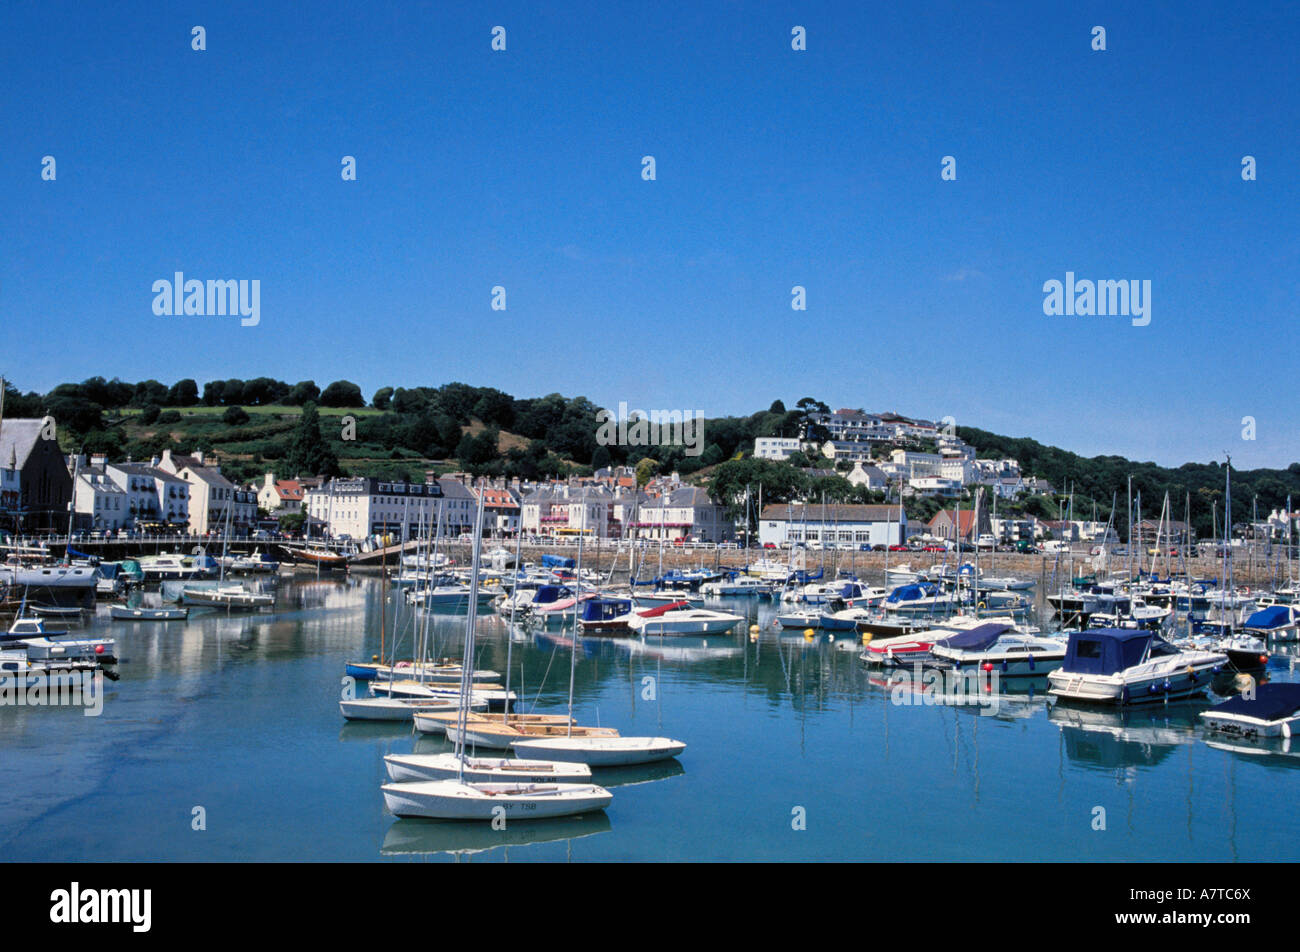 Boats at harbor, St. Aubin's Bay, Jersey, Channel Islands, England Stock  Photo - Alamy